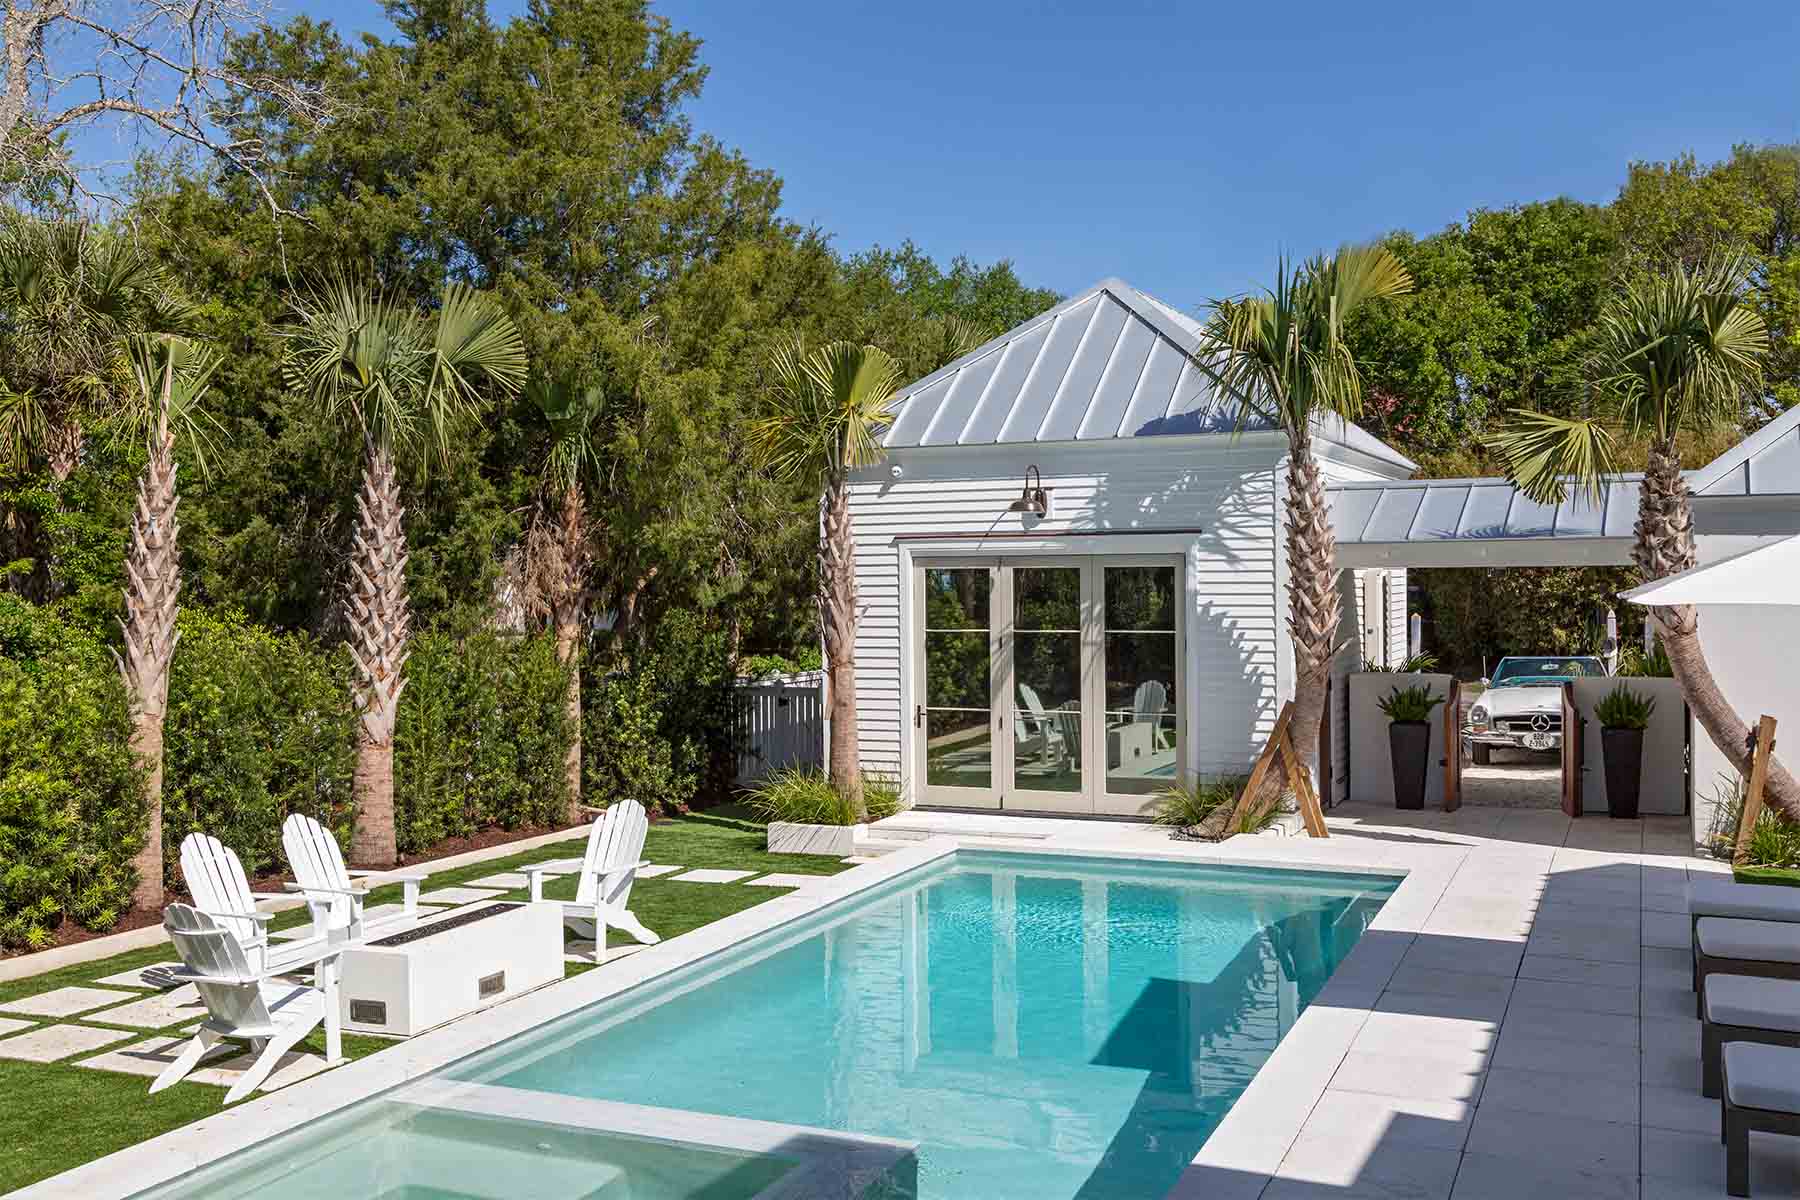 This Refurbished home features a backyard oasis amongst the sullivan's island landscape